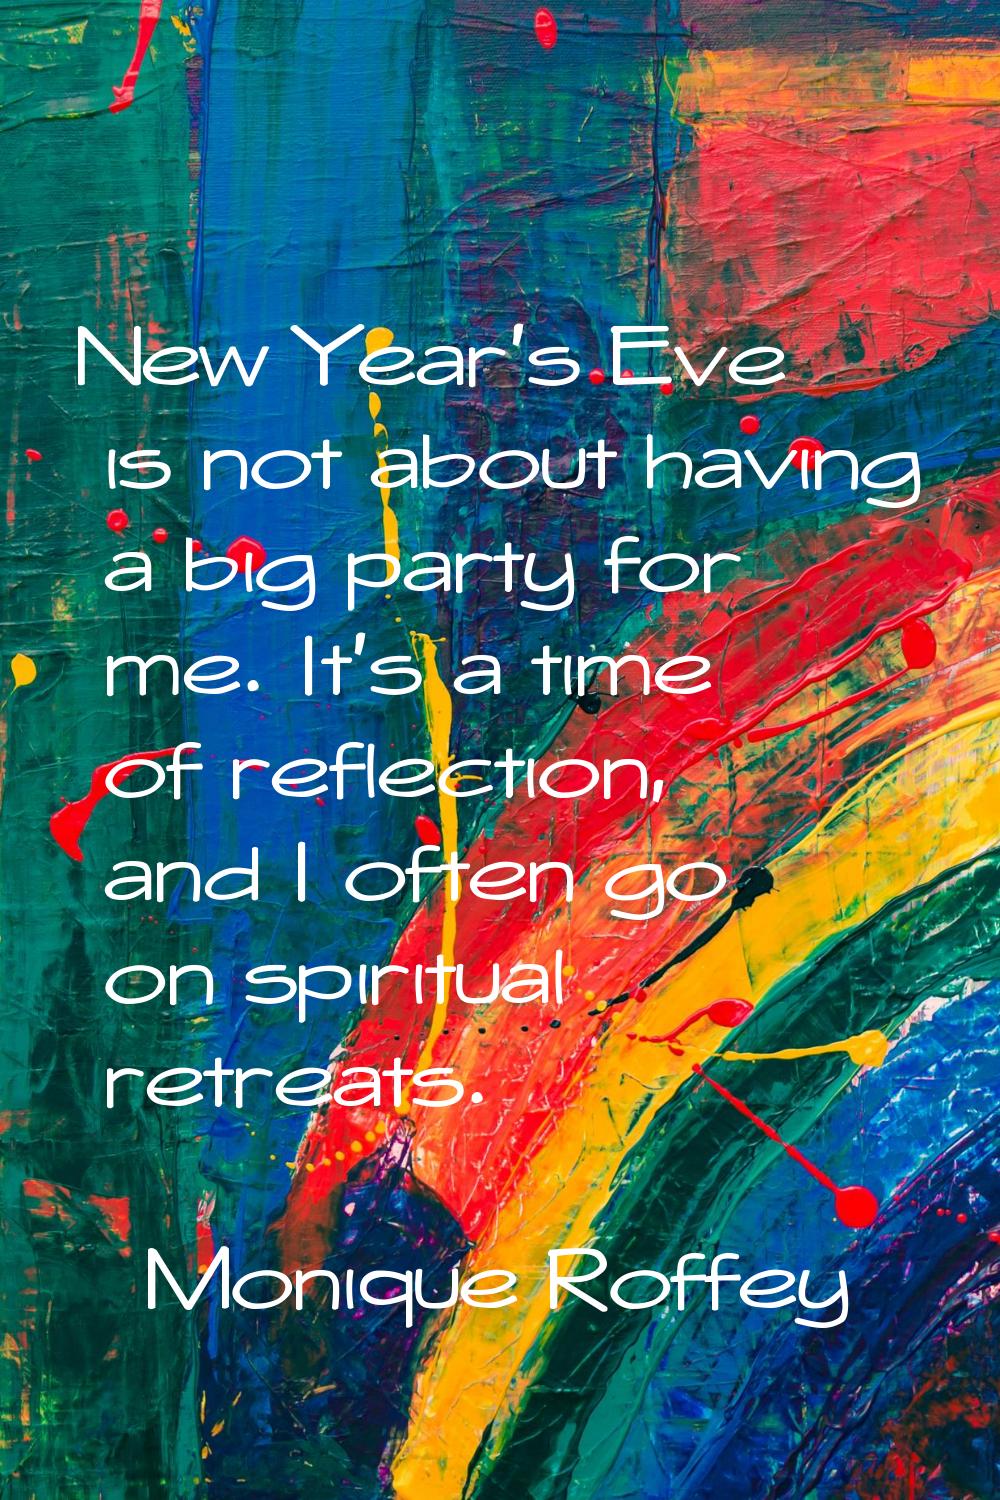 New Year's Eve is not about having a big party for me. It's a time of reflection, and I often go on